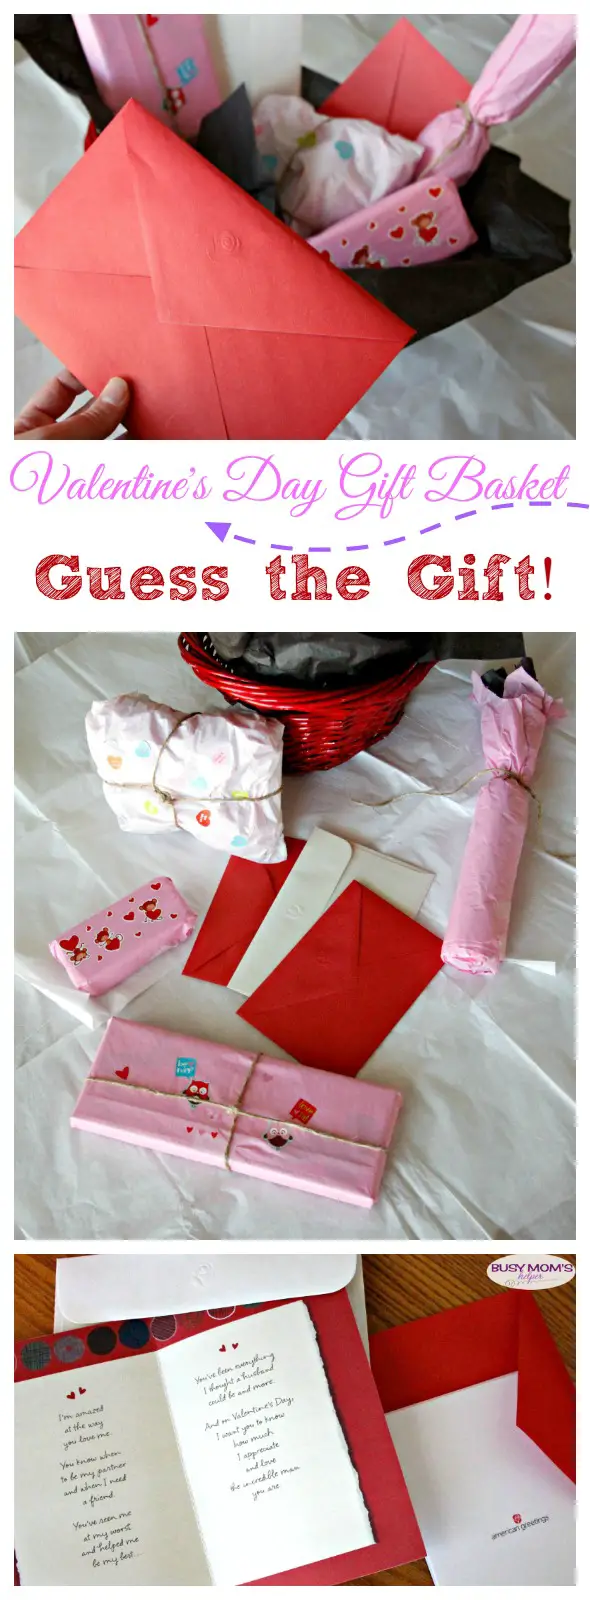 Valentine's Day Gift Basket: Guess the Gift! A playful and creative way to give to your sweetie this holiday #MyTuesdayValentine #ad